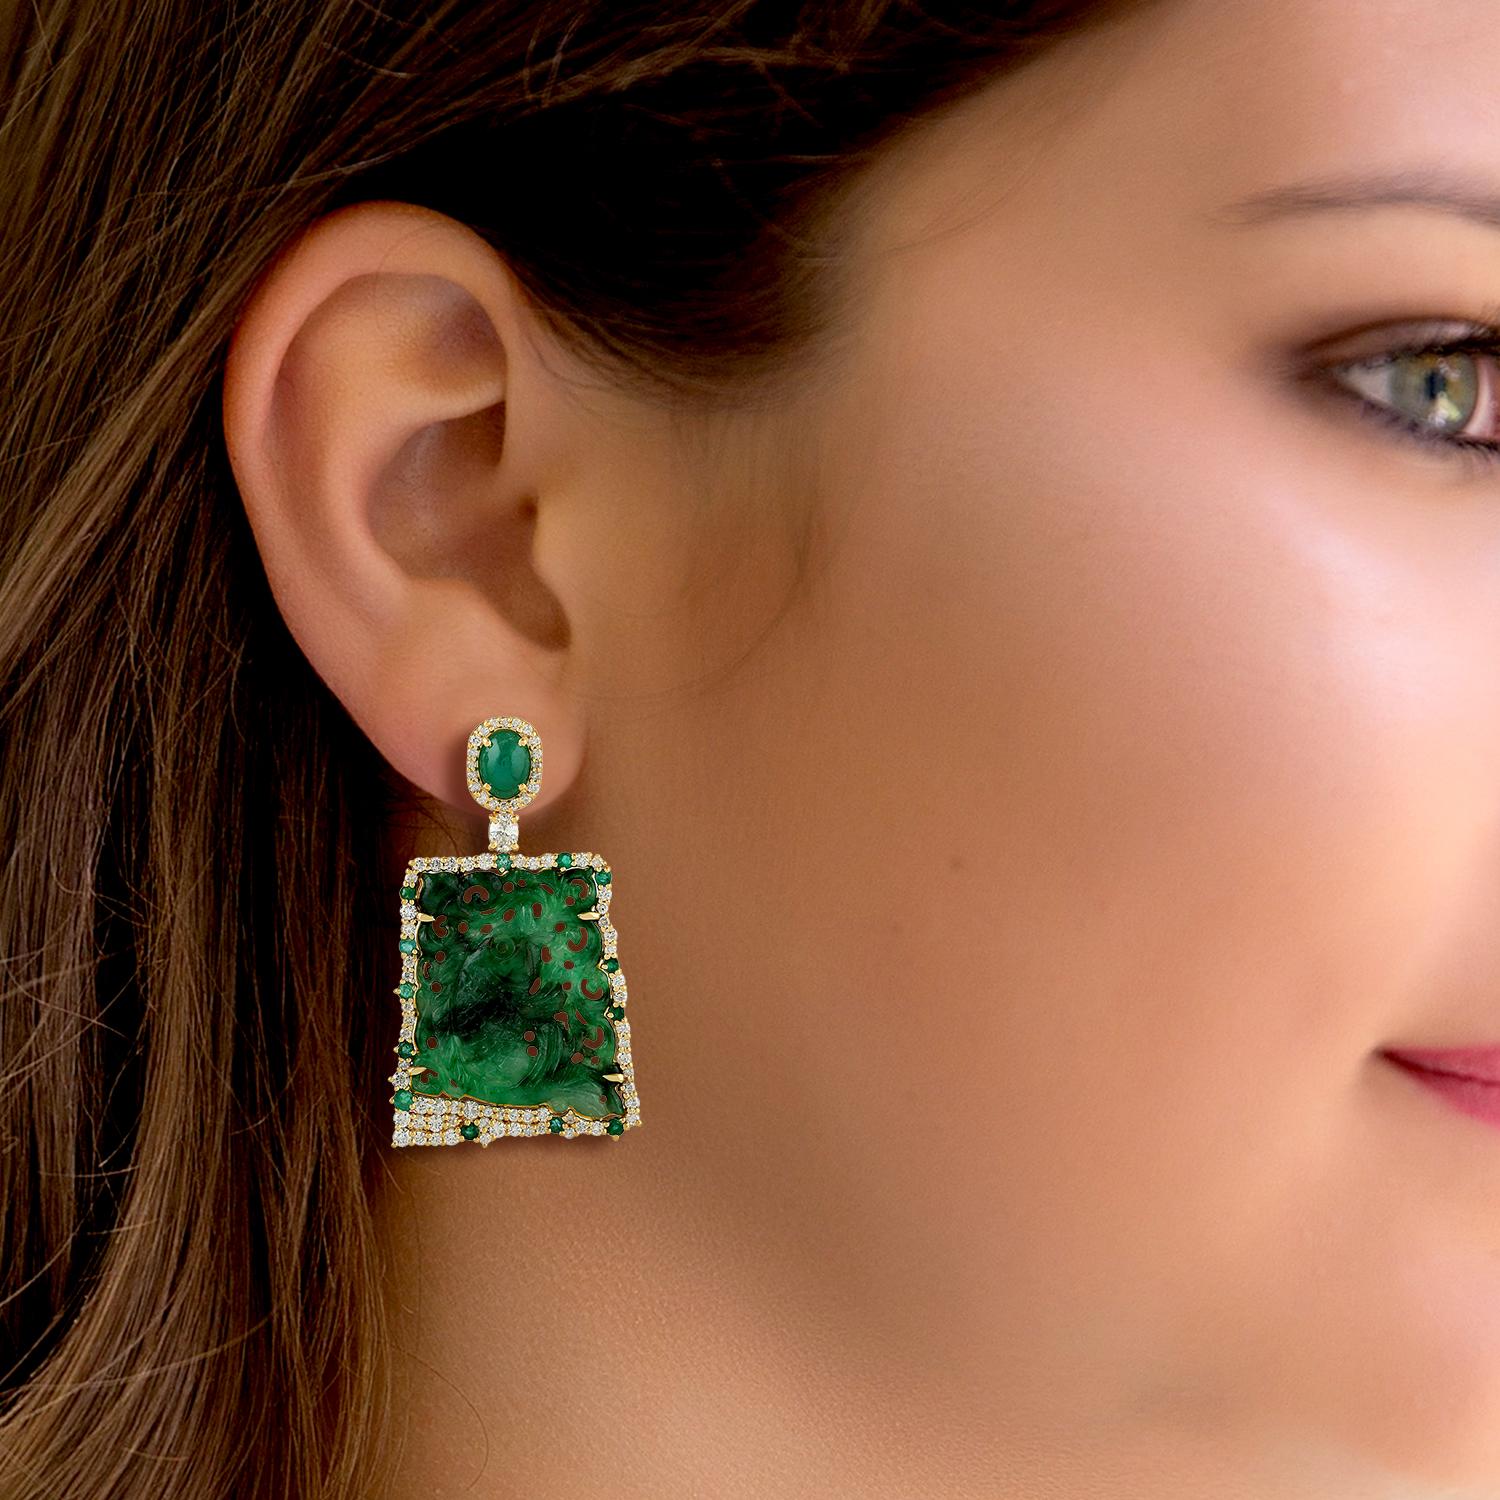 These stunning hand carved Jade earrings are crafted in 18-karat gold. It is set in 24.62 carats Jade, 2.48 carats emerald, 2.31 carats of sparkling diamonds.

FOLLOW  MEGHNA JEWELS storefront to view the latest collection & exclusive pieces. 